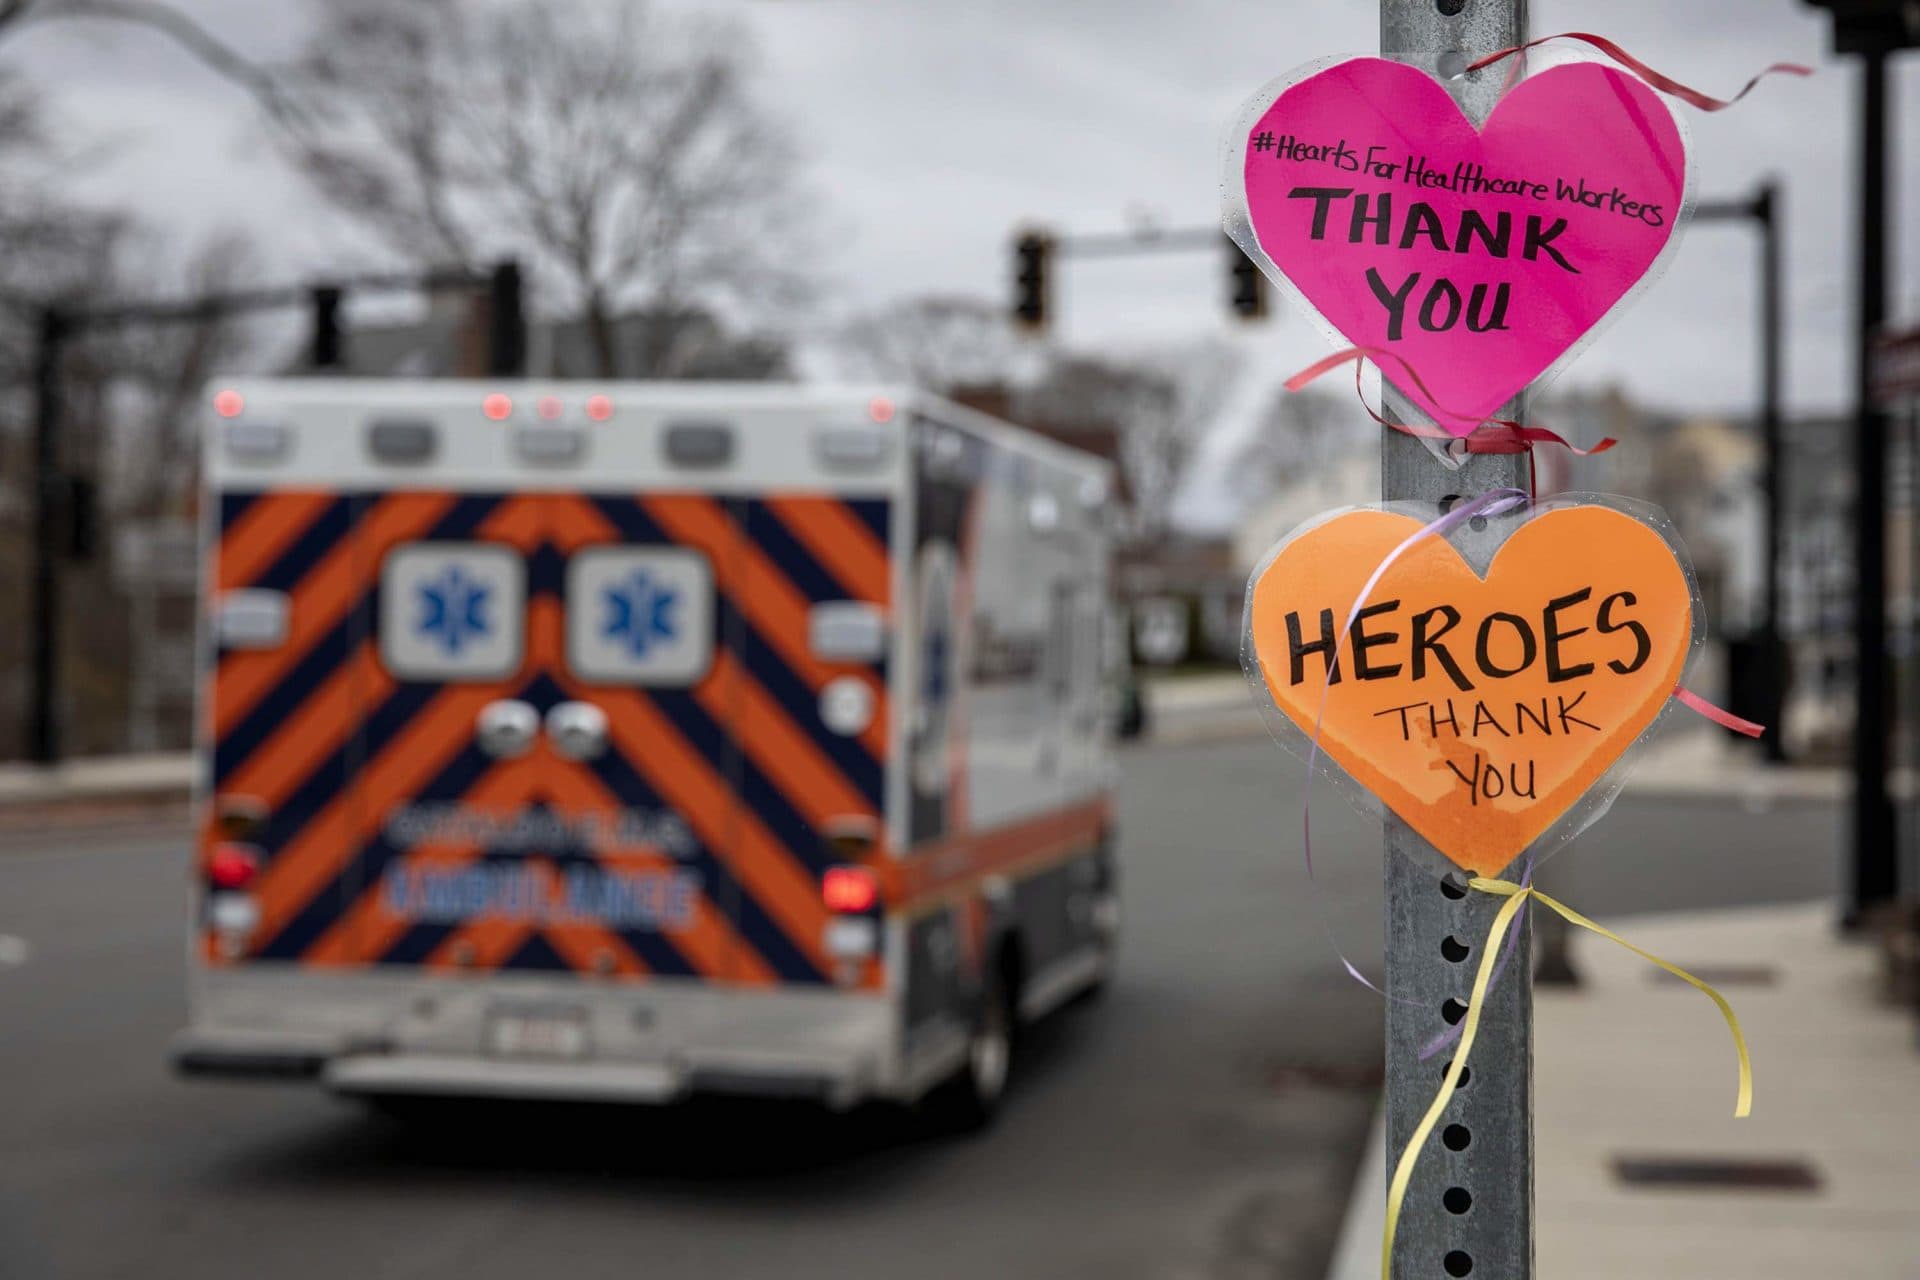 April 2: A message left on a street signpost by the Melrose Wakefield Hospital. (Robin Lubbock/WBUR)